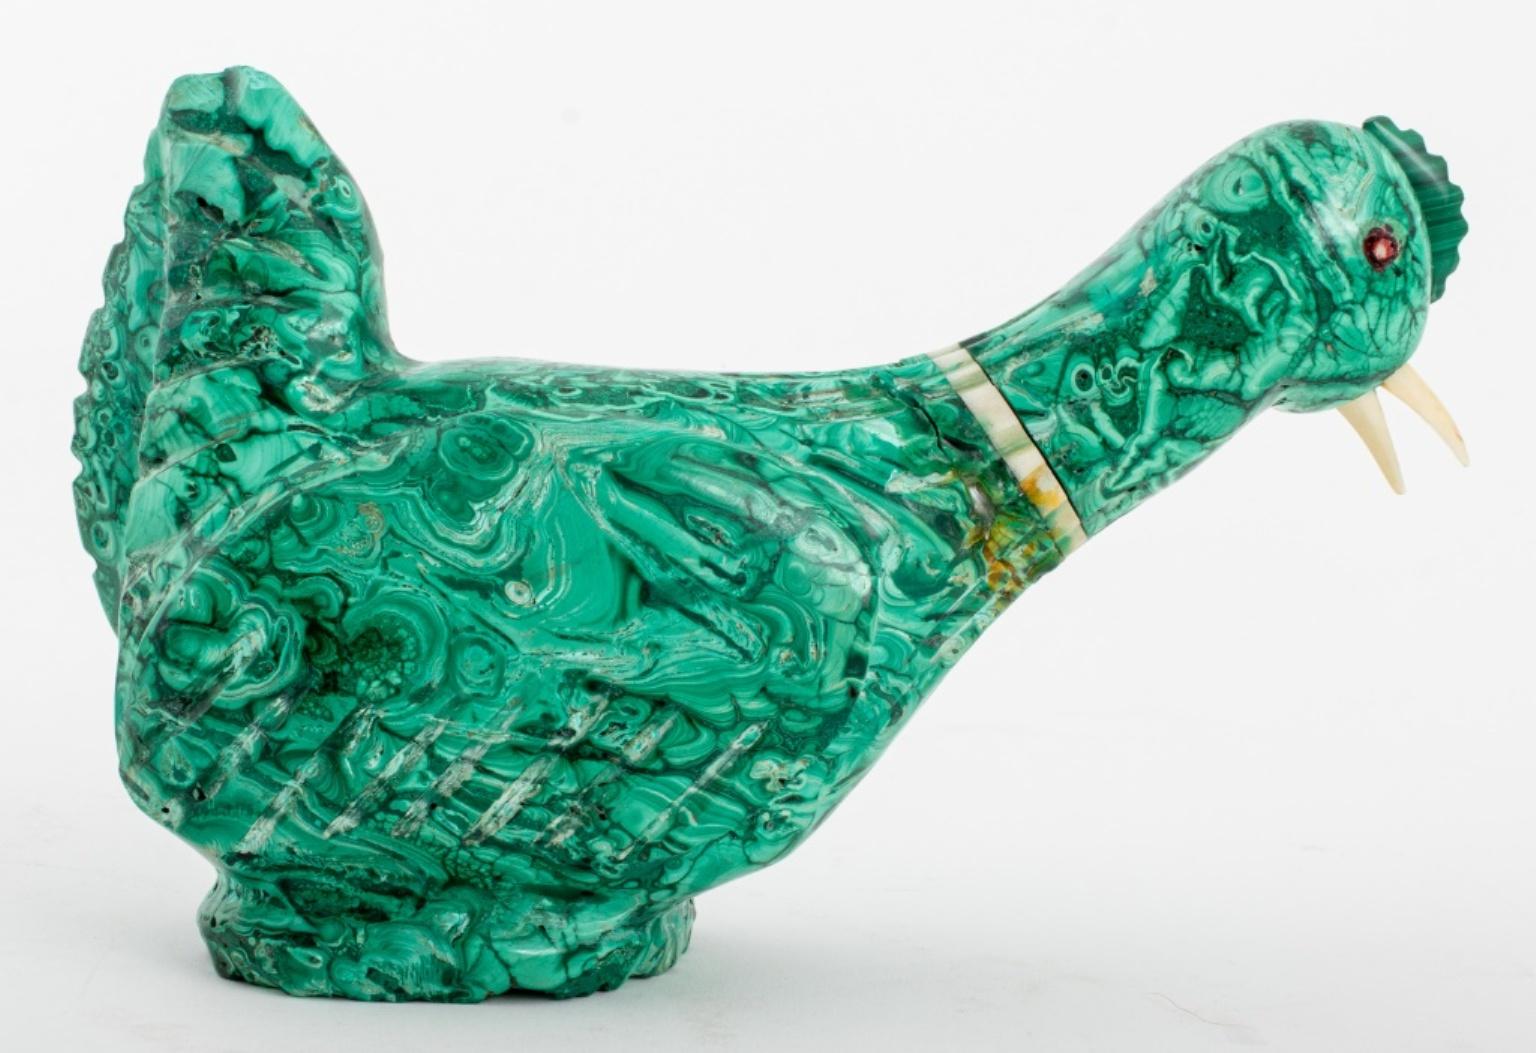 Malachite hardstone sculpture depicting a hen chicken, inset with rock crystal quartz accents and bone beak.

Dimensions: 5